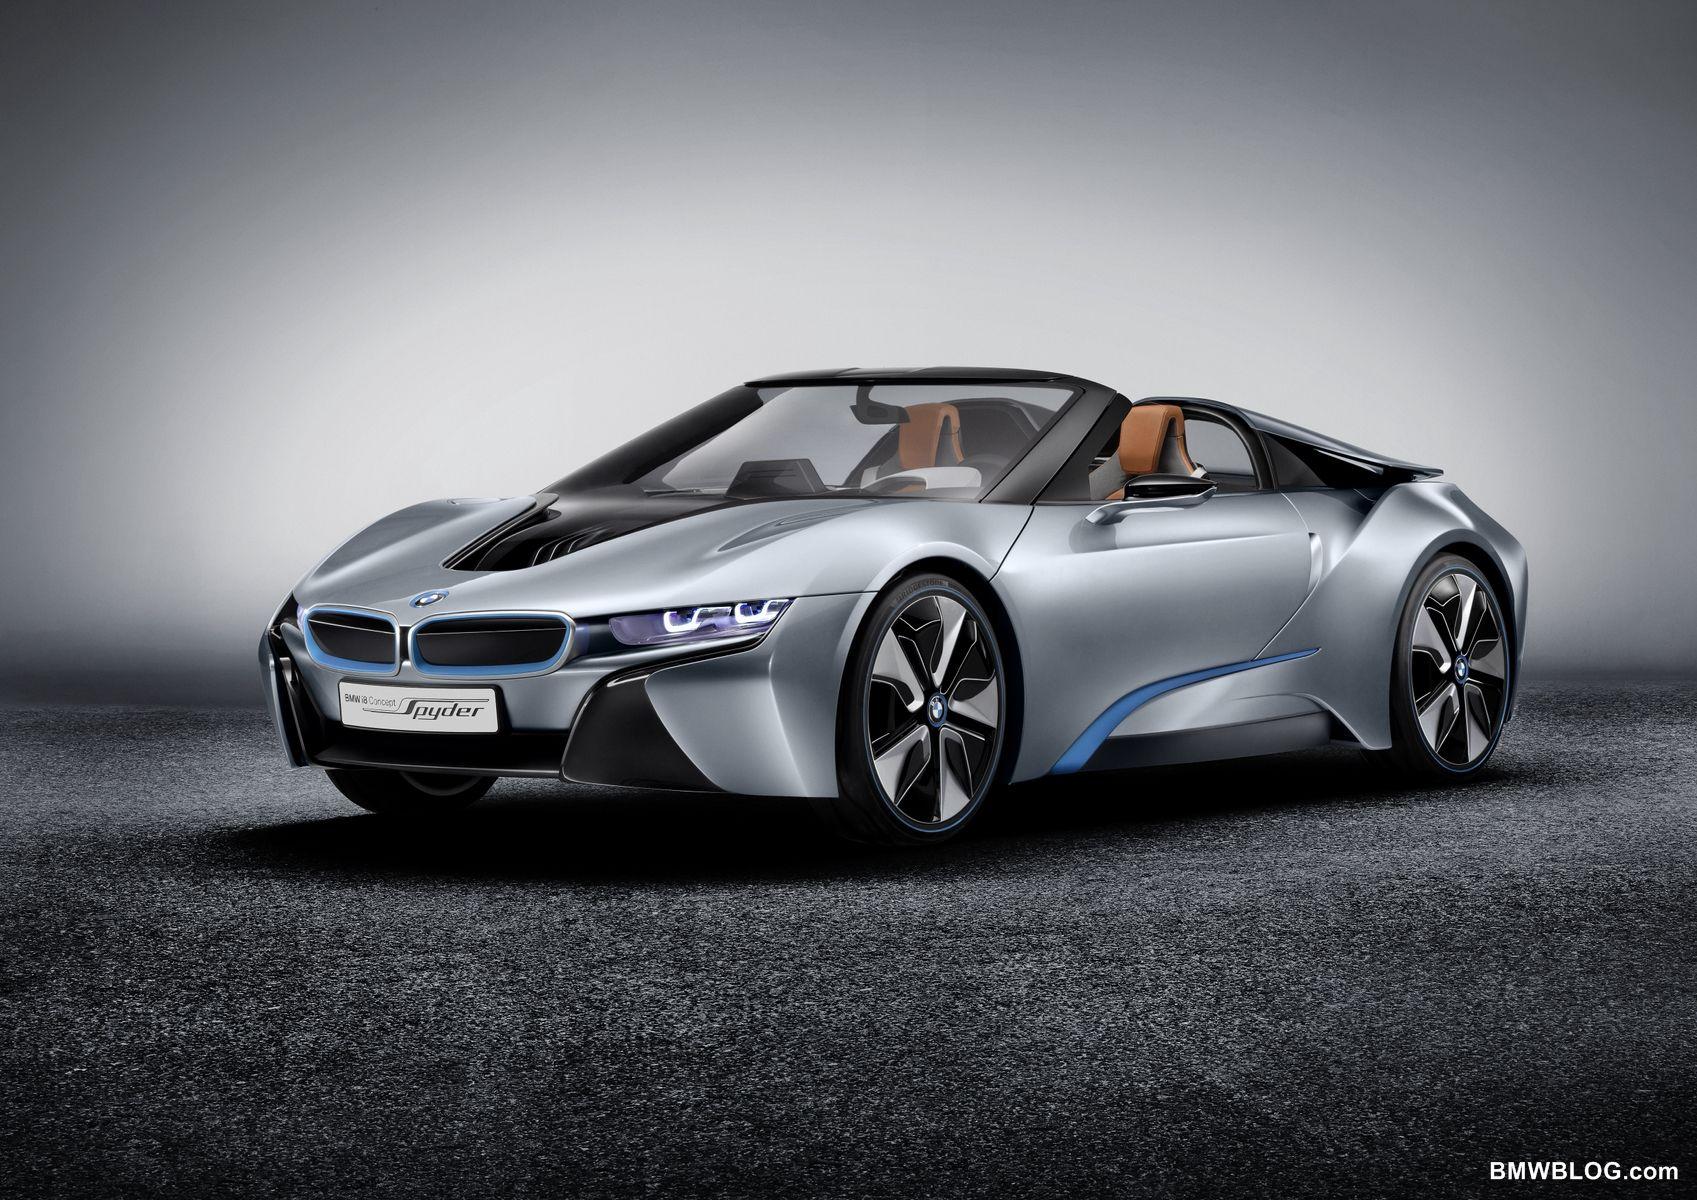 SPIED: BMW i8 Spyder caught testing with roof on